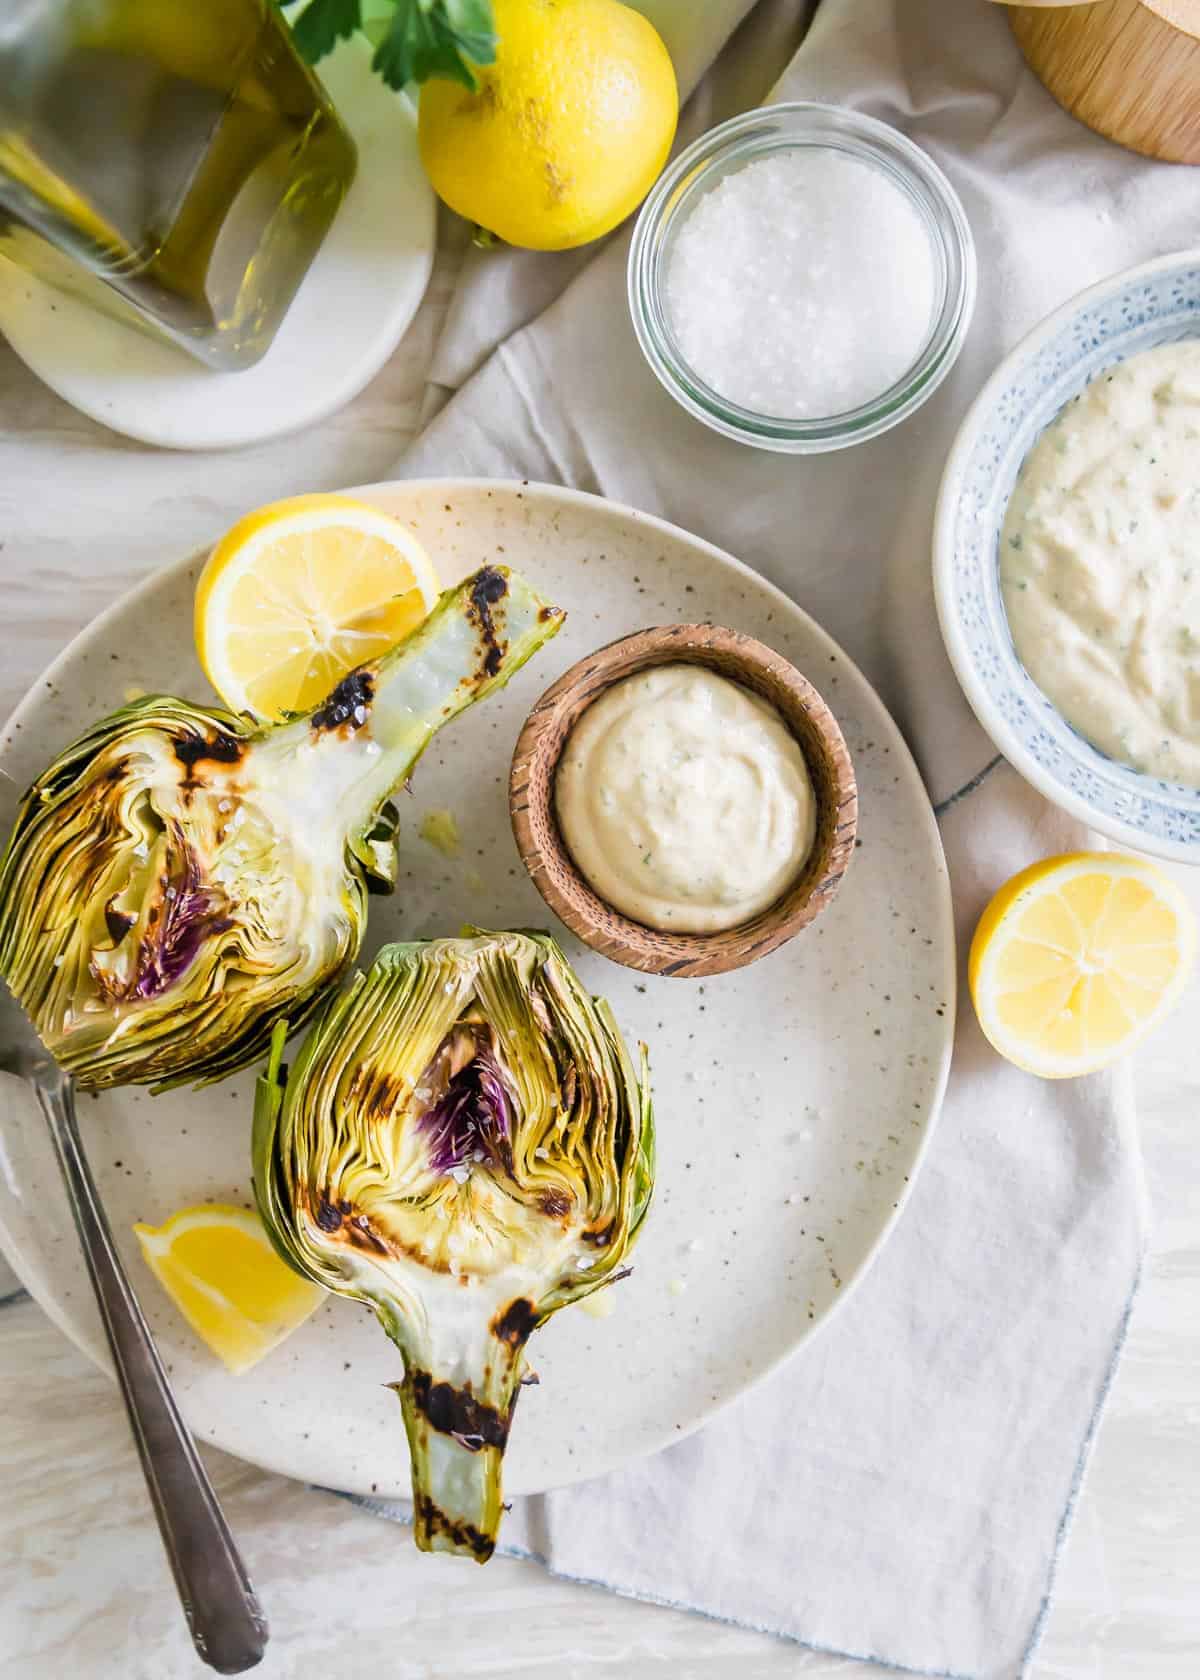 grilled artichokes with lemon tahini dipping sauce